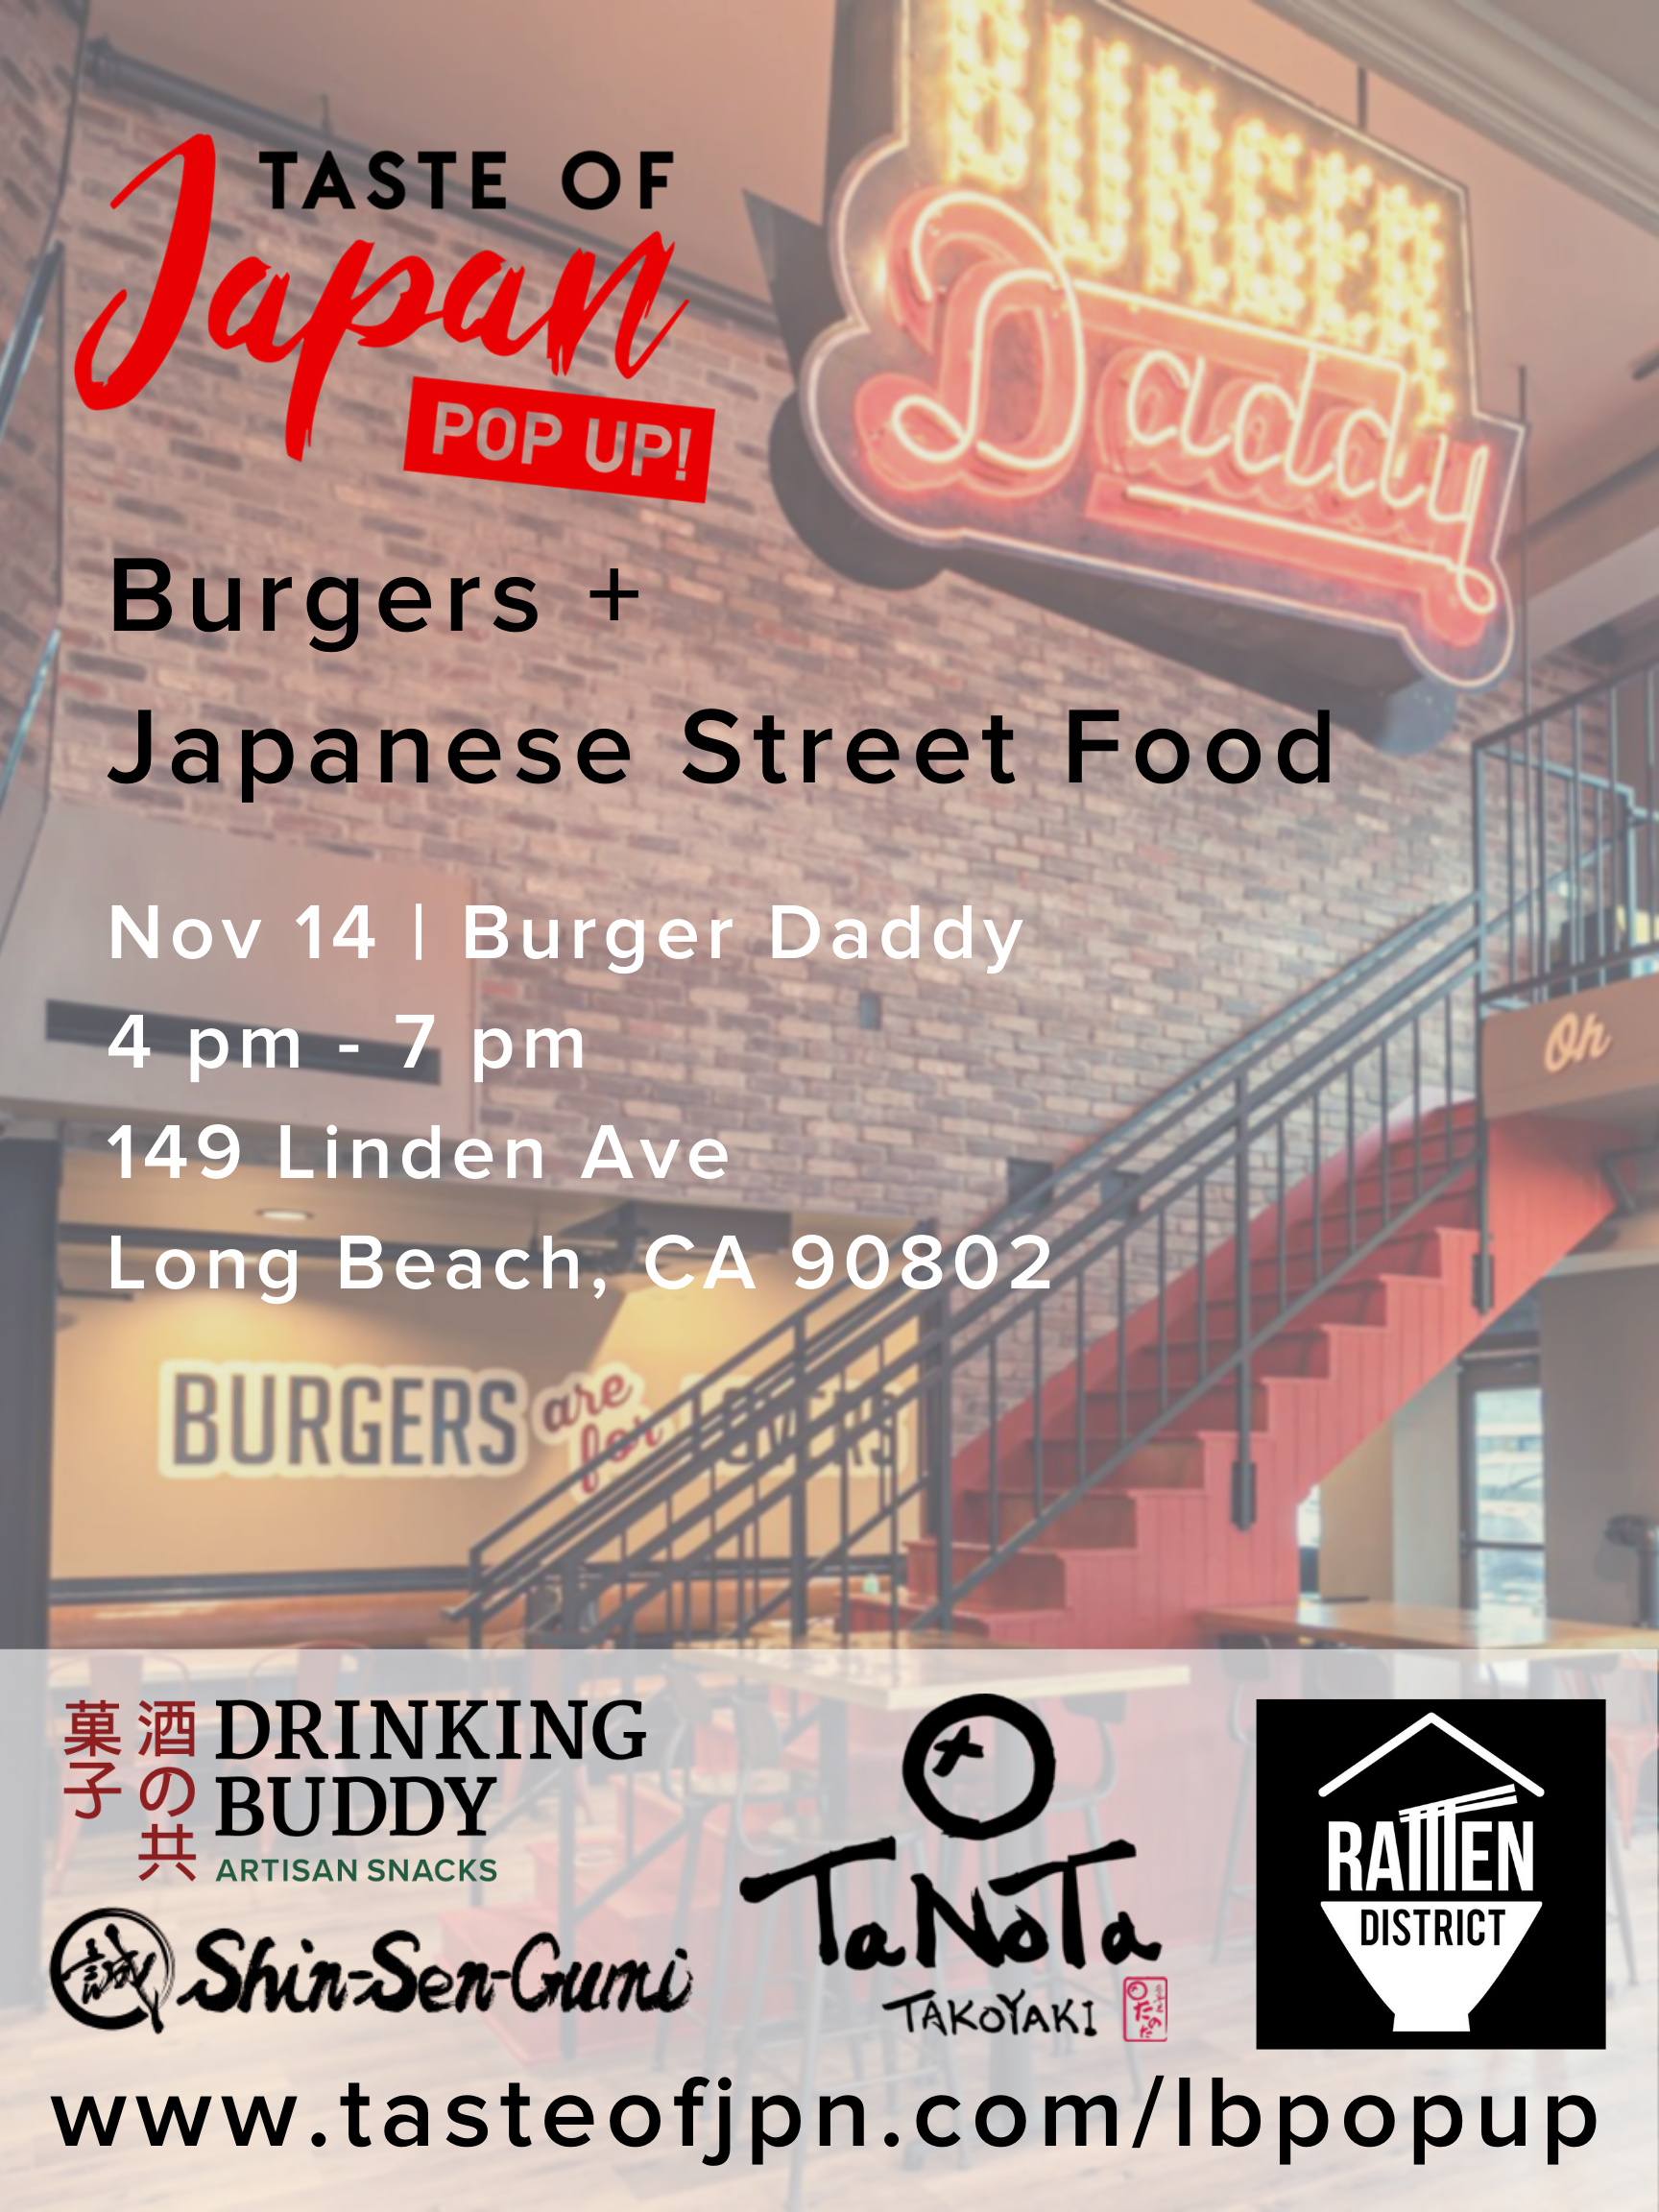 Poster for Taste of Japan event at Burger Daddy Long Beach